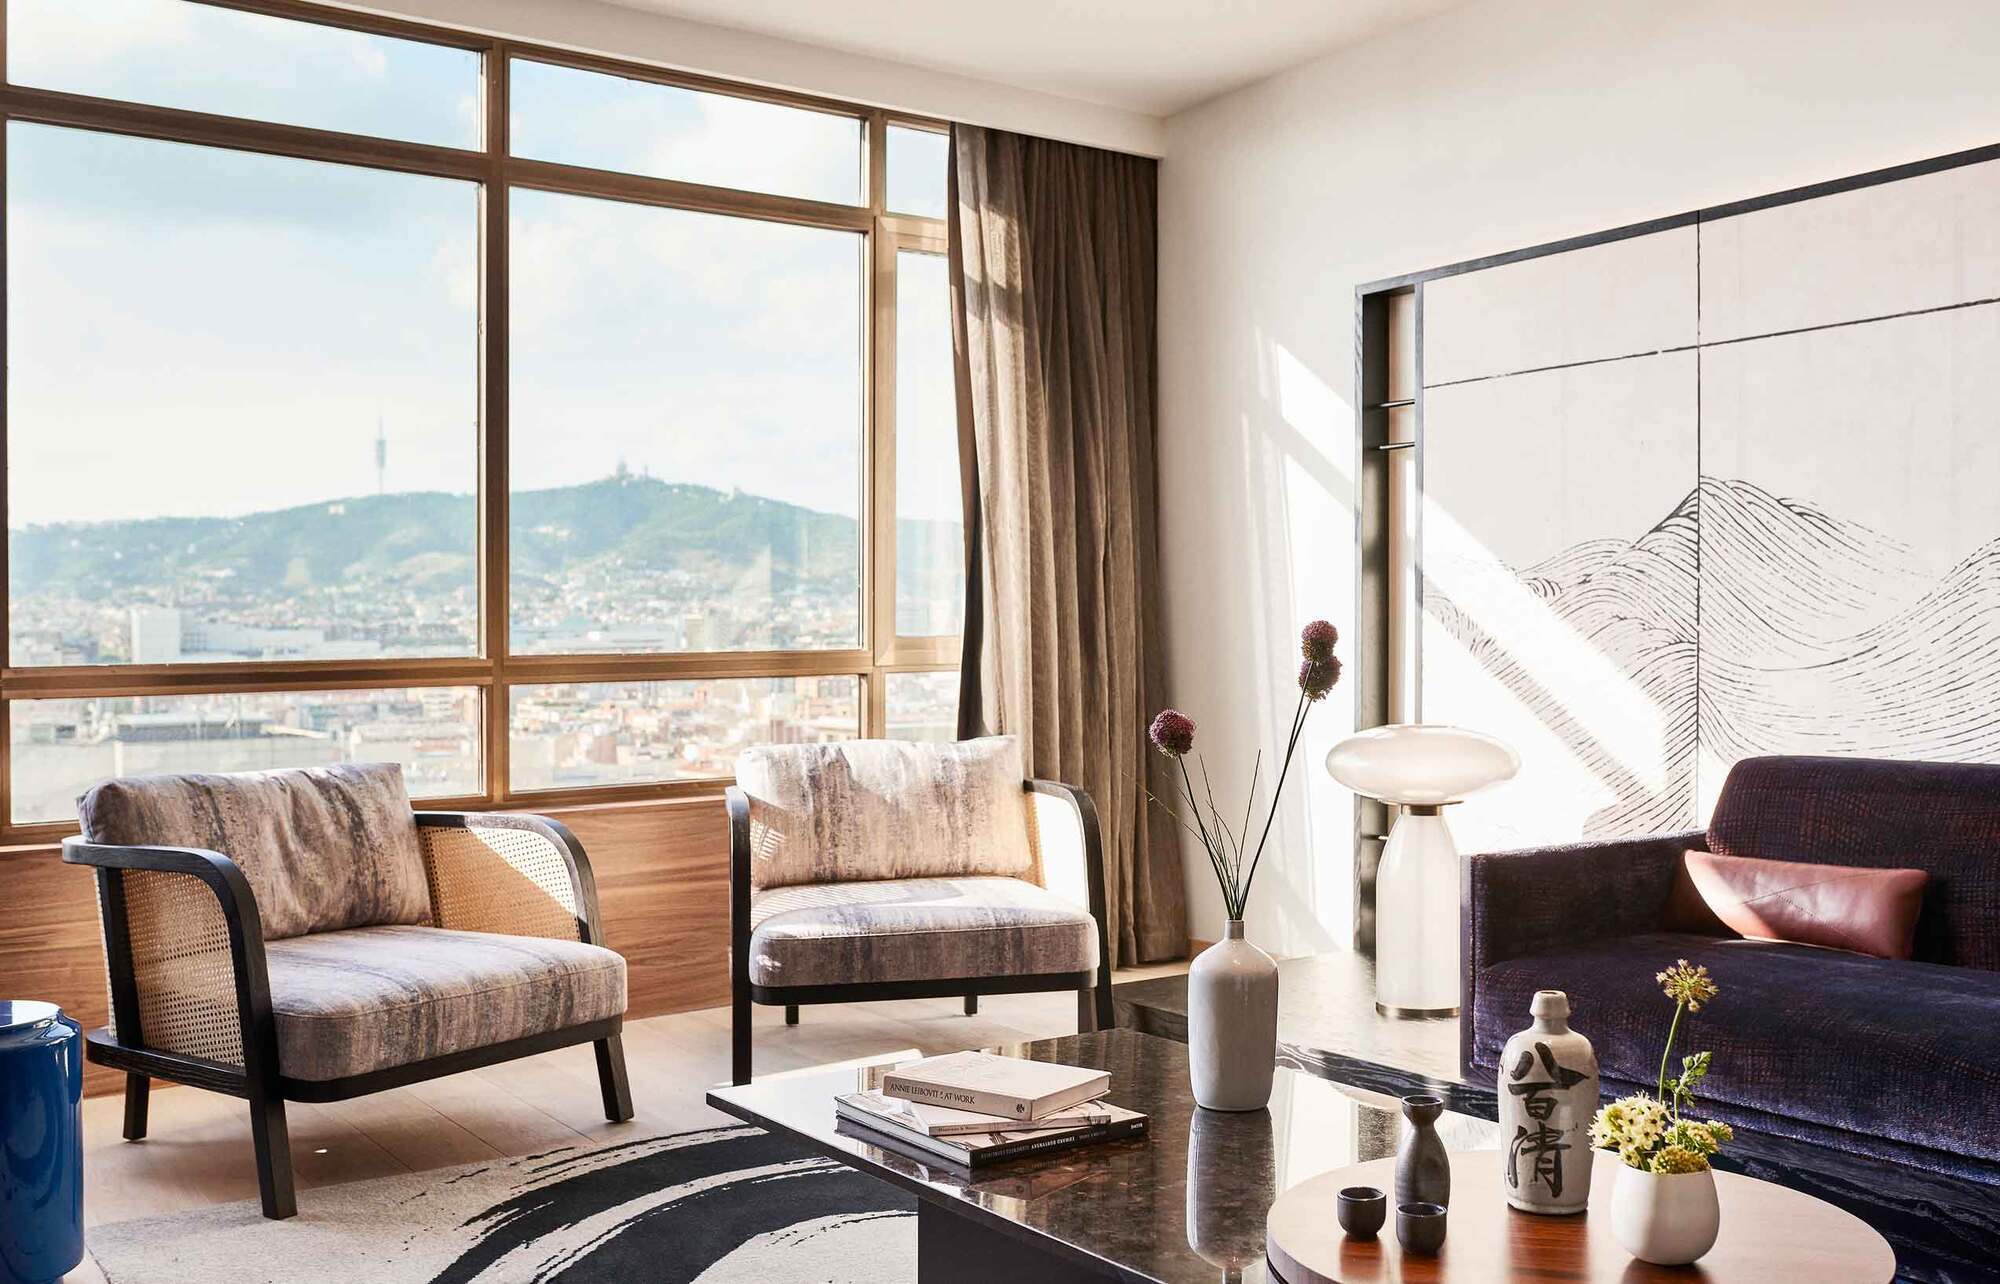 The best hotels for a stopover in Barcelona. Luxurious places with mind-blowing views of the city from above